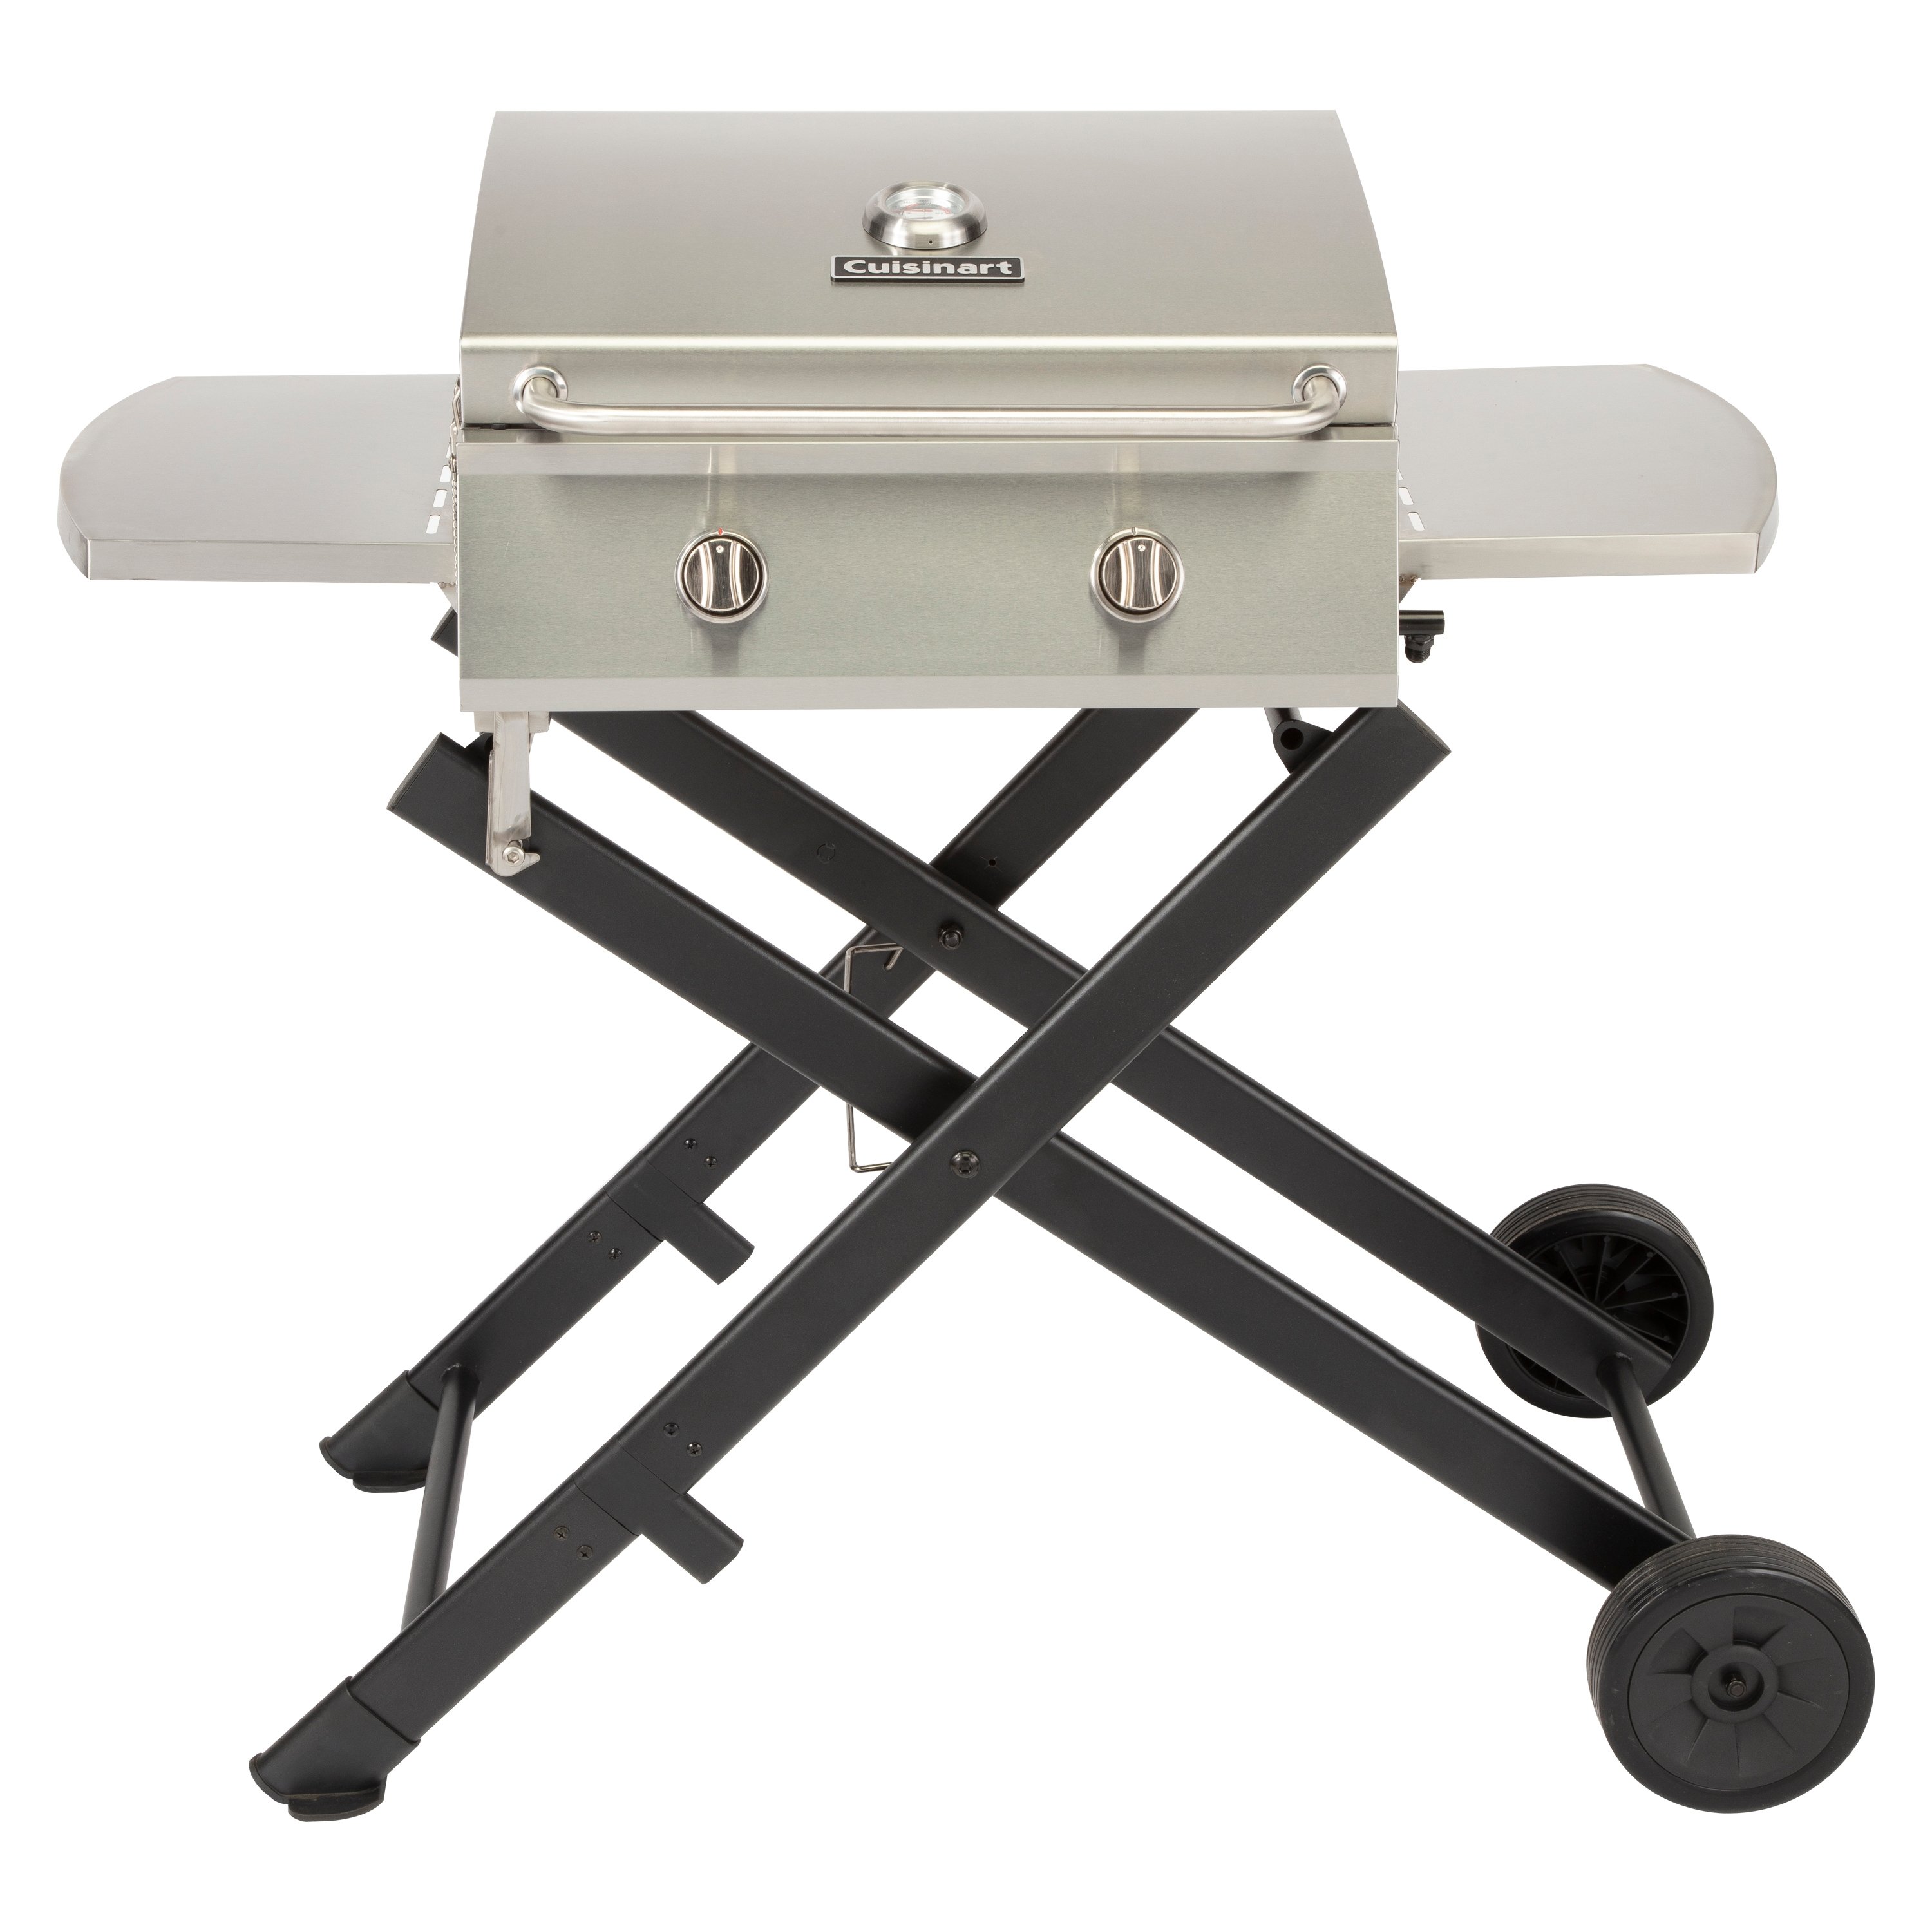 camouflage Beangstigend Geheugen Cuisinart® Chef's Style Roll-Away Gas Grill